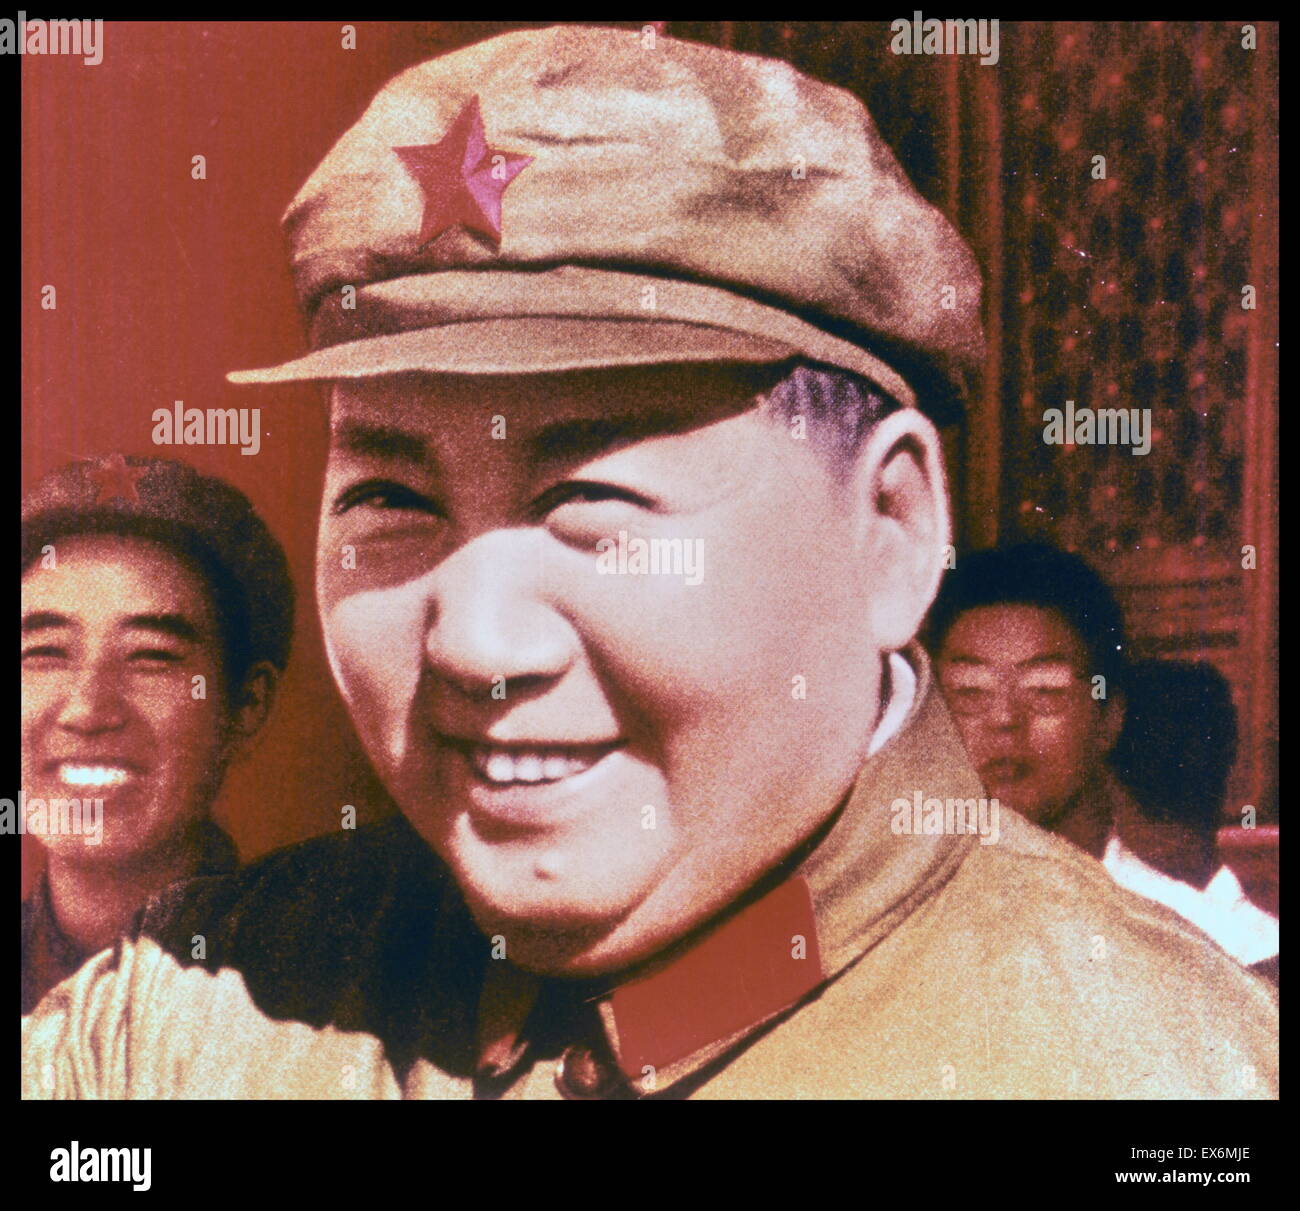 Mao Zedong (Mao Tse-tung December 26, 1893 – September 9, 1976), Chinese Communist revolutionary and the founding father of the People's Republic of China, Stock Photo